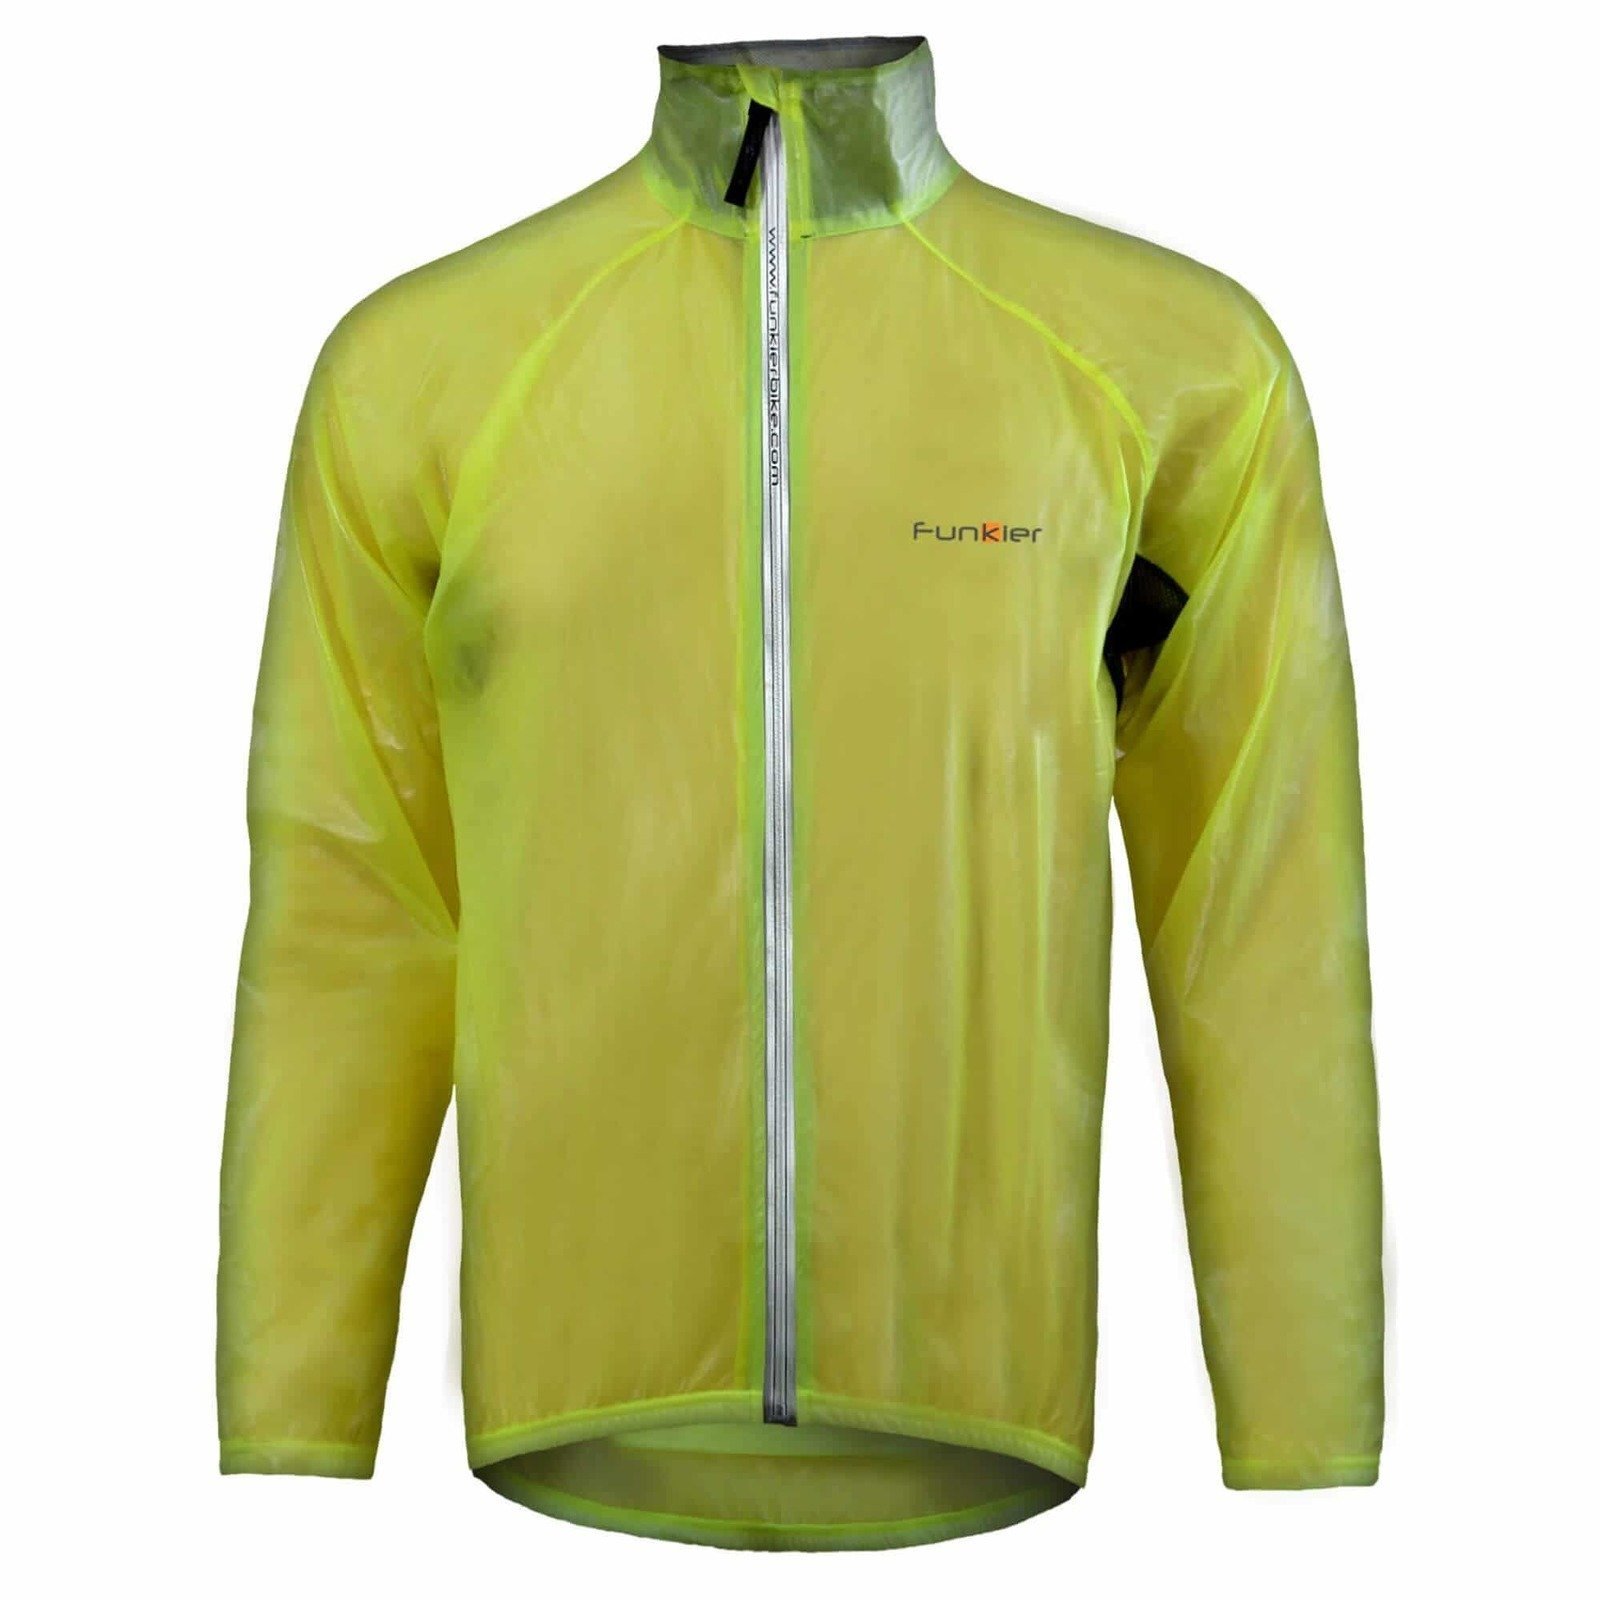 Cycling Jacket, Vest Funkier Lecco Clear Yellow M Jacket